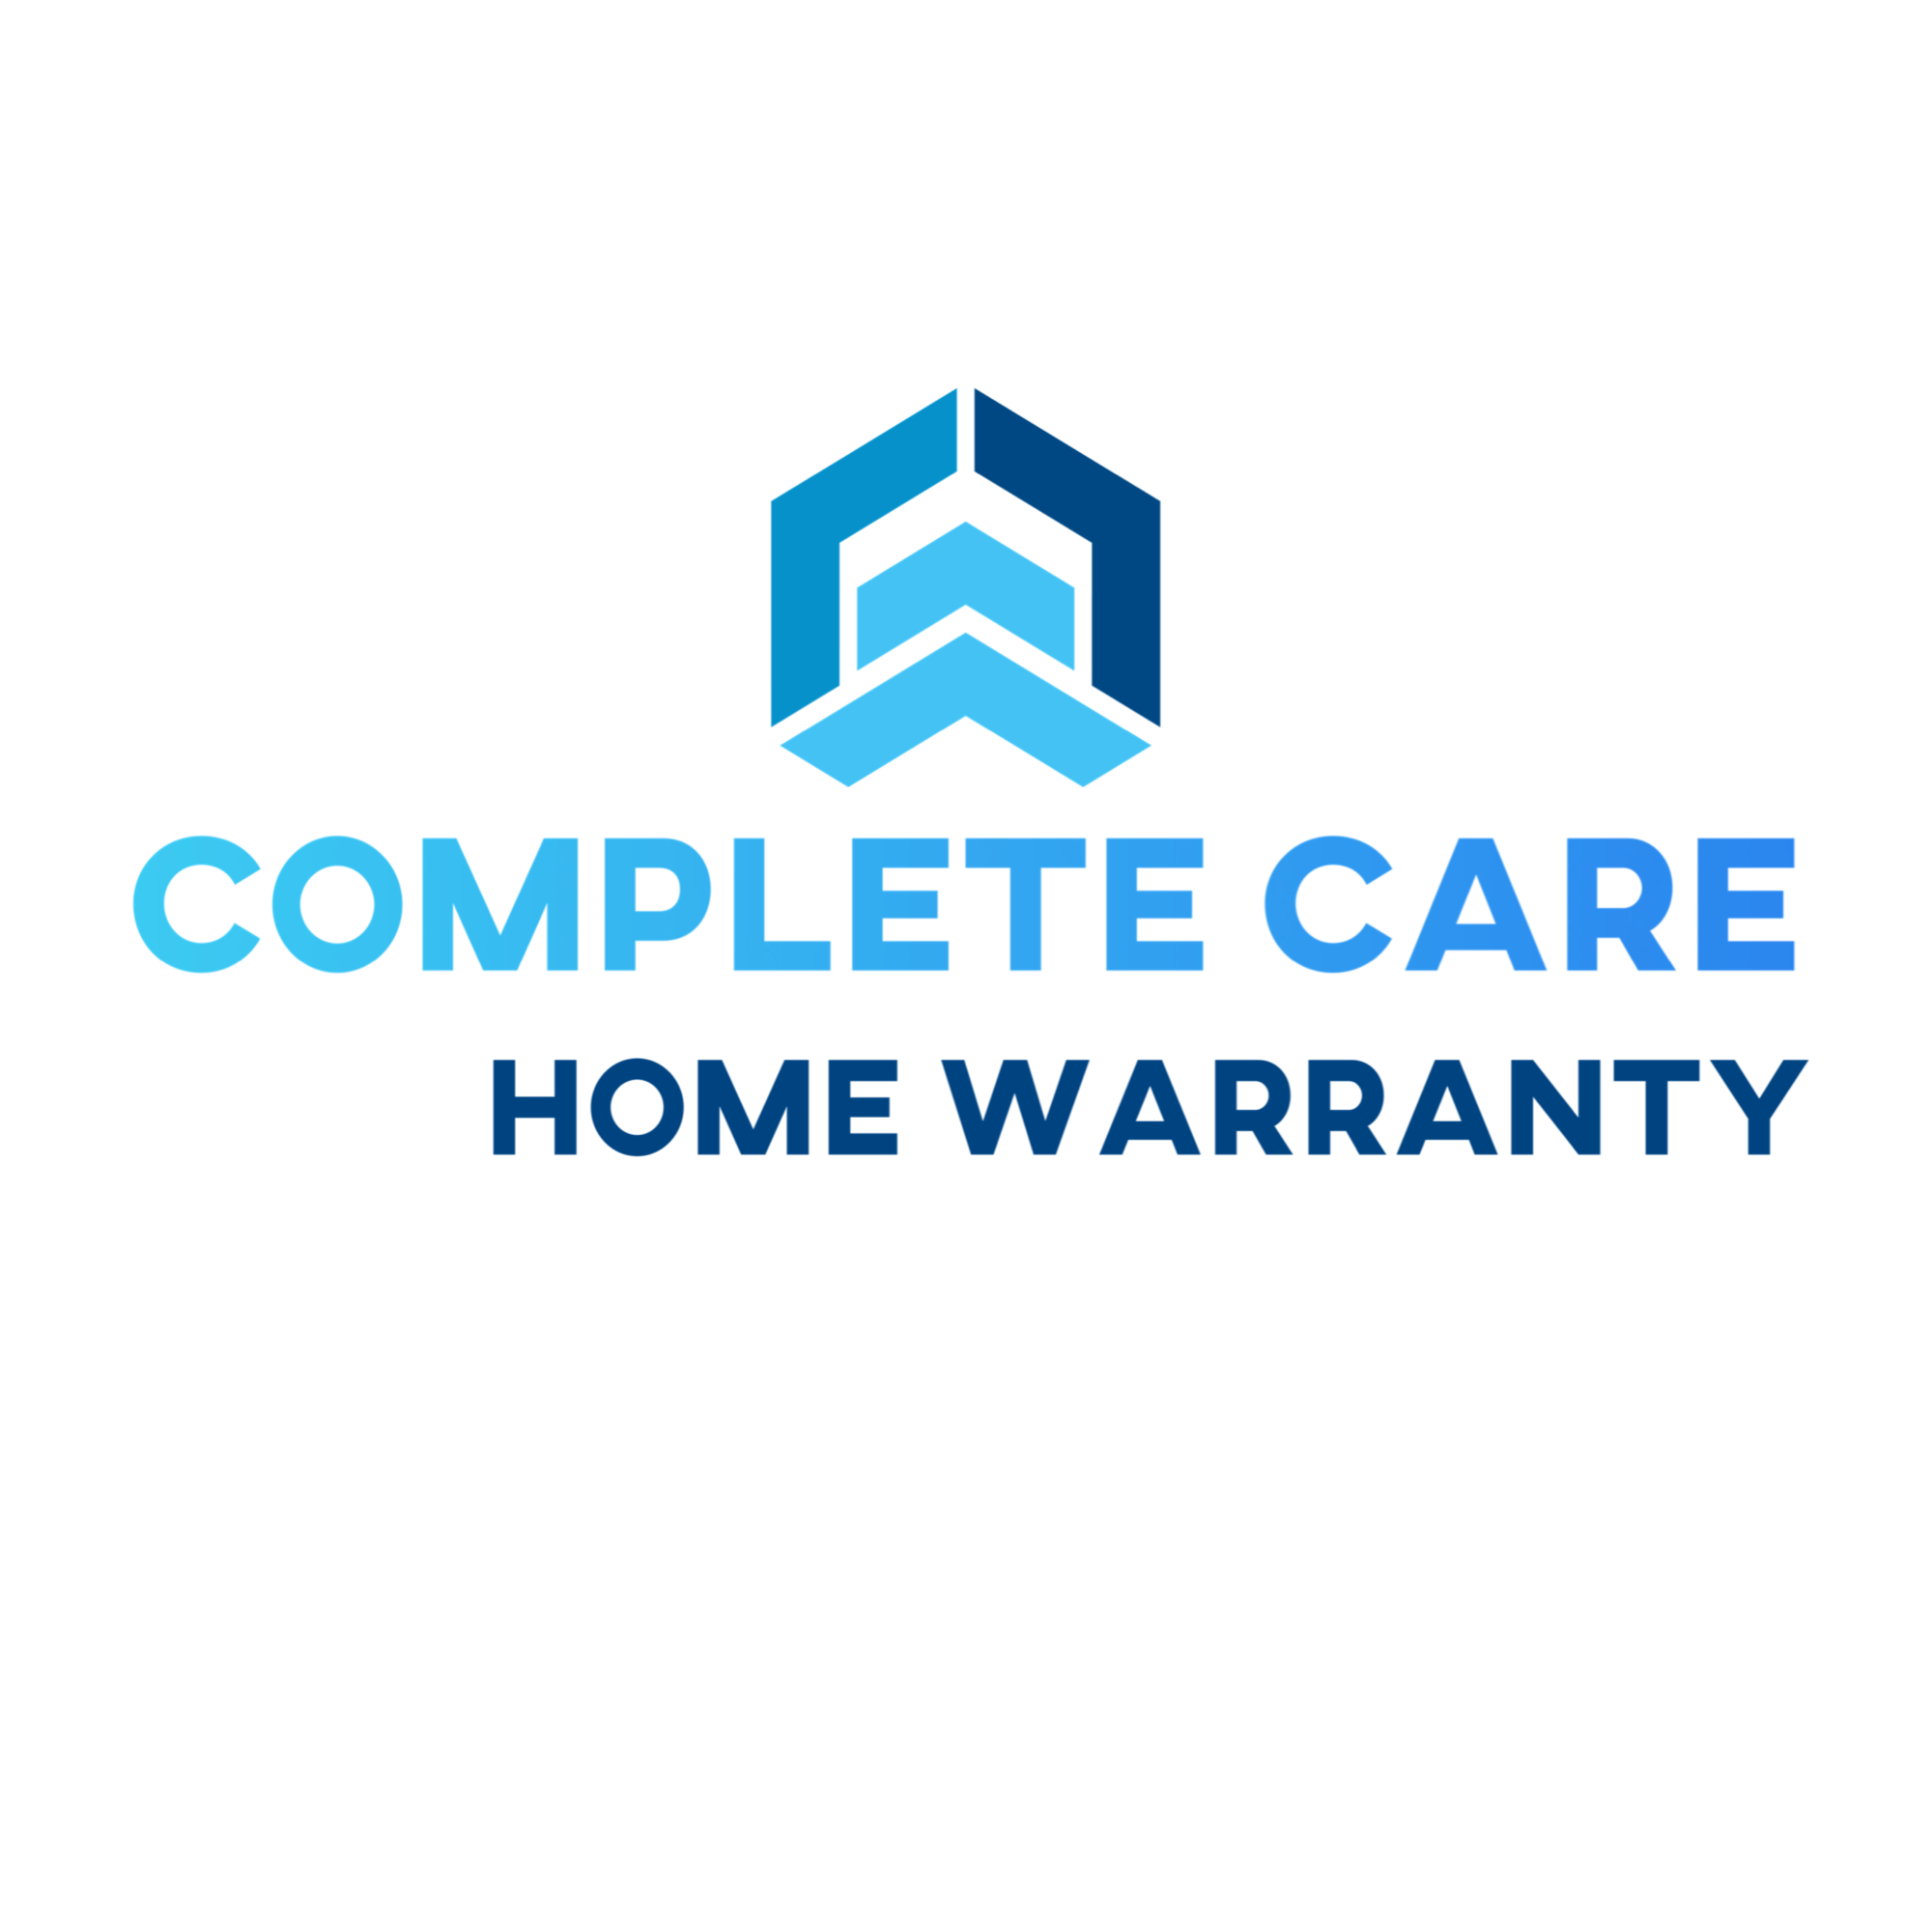  Complete Care Home Warranty